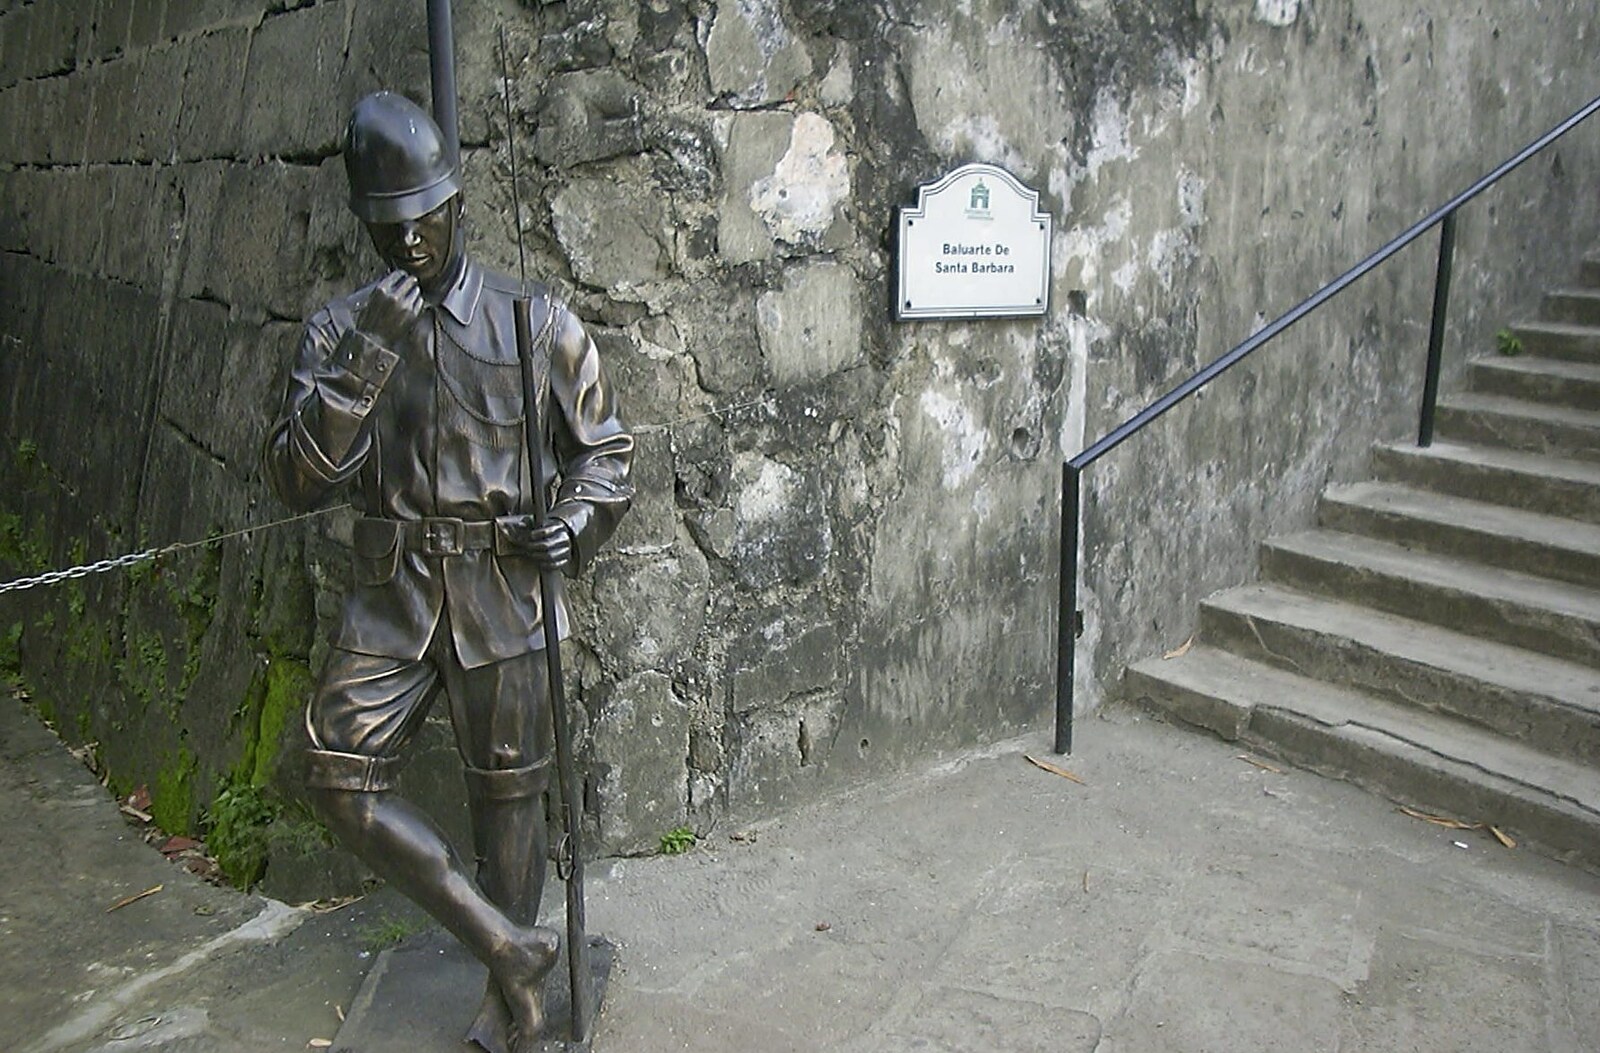 A bronze soldier with rolled-up trousers from A Postcard From Manila: a Working Trip, Philippines - 9th July 2004